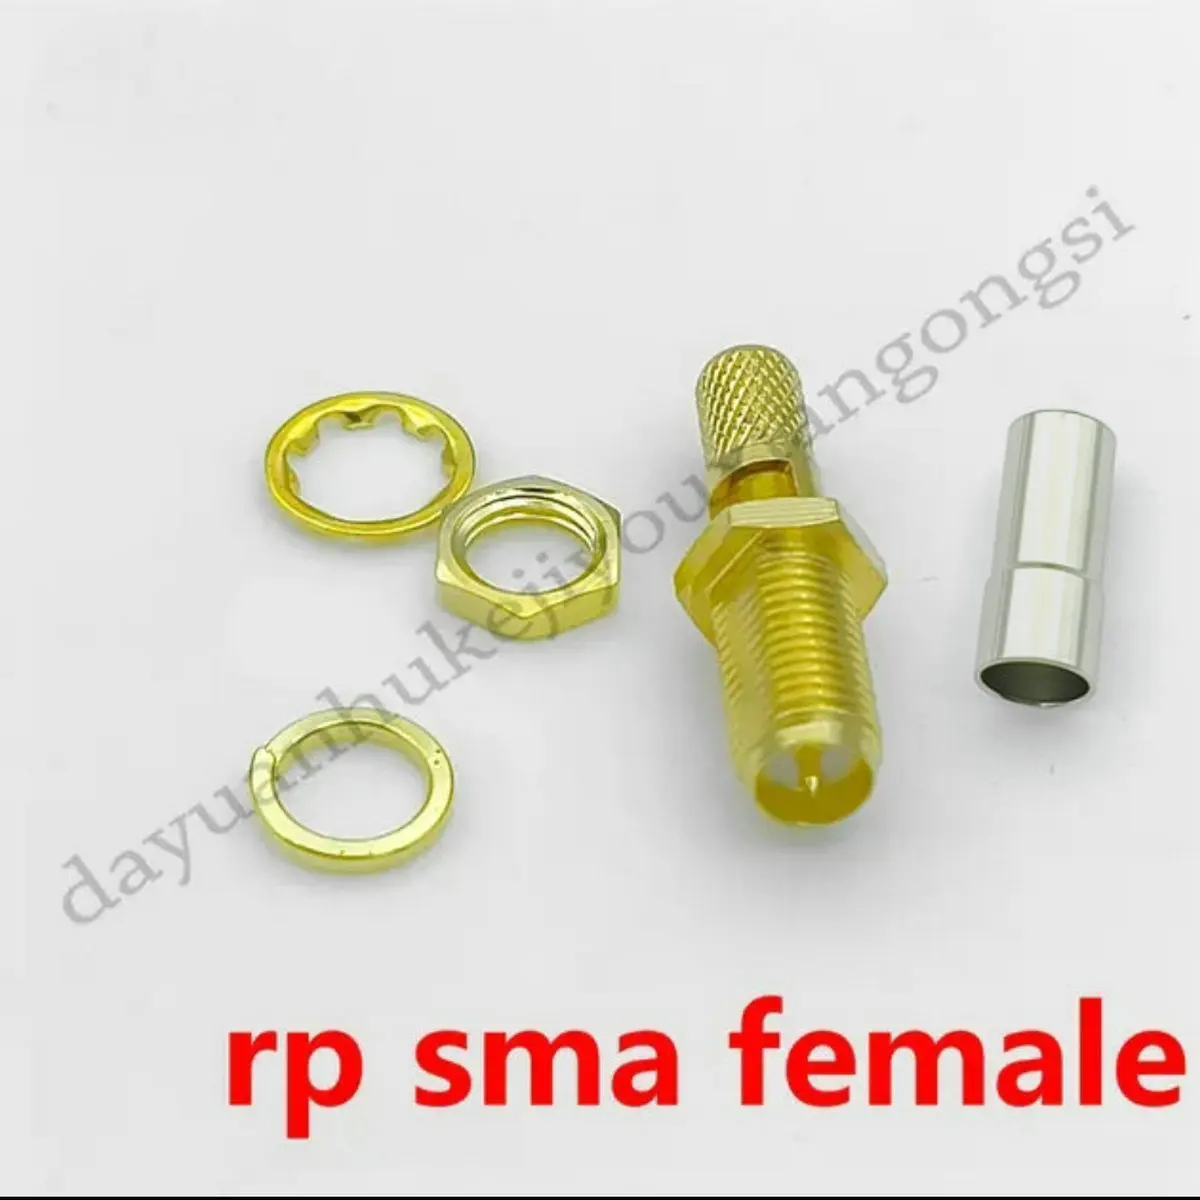 

RF coaxial coax adapter RP SMA Female Window Crimp RF Connector For LMR195 RG58 RG400 RG142 Cable